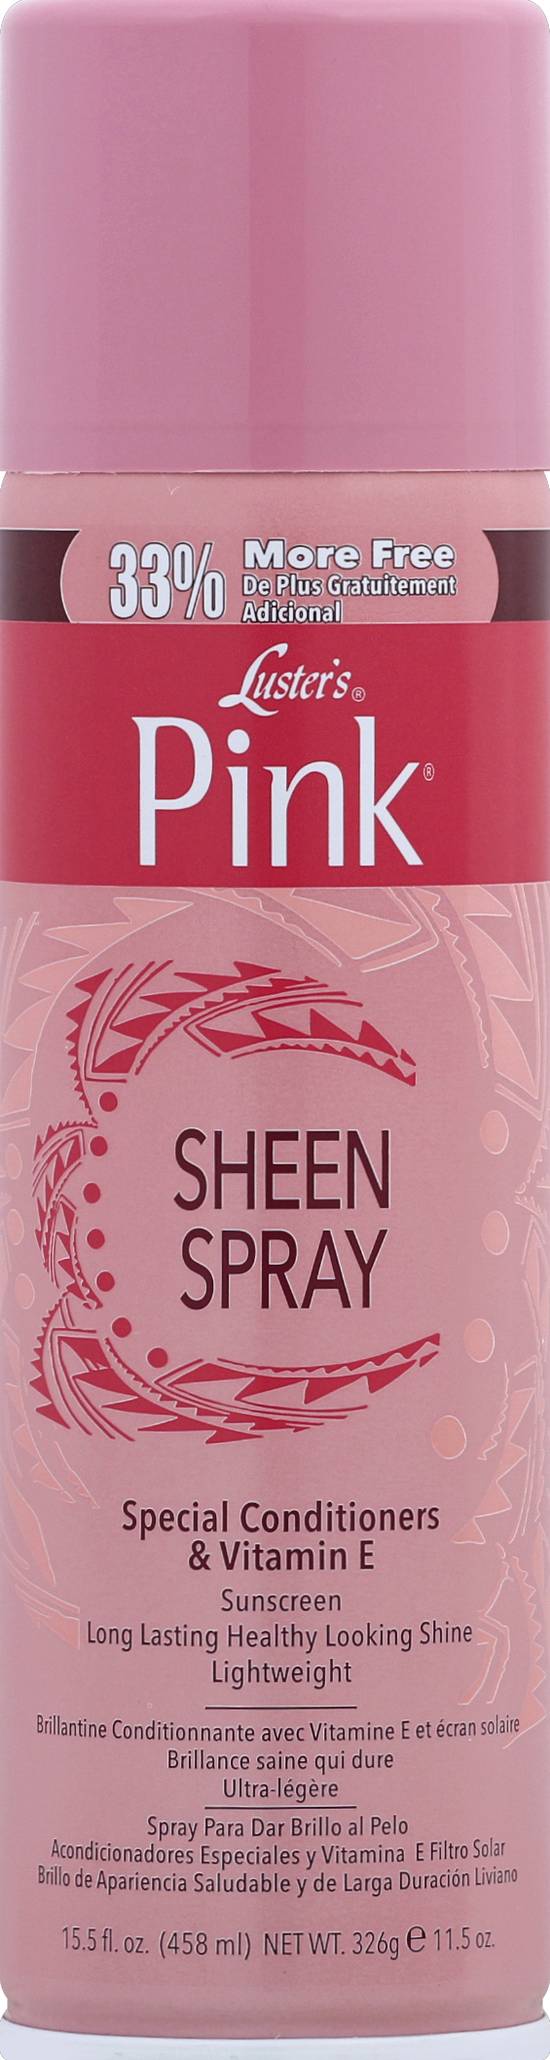 Pink Lusters Sheen Spray